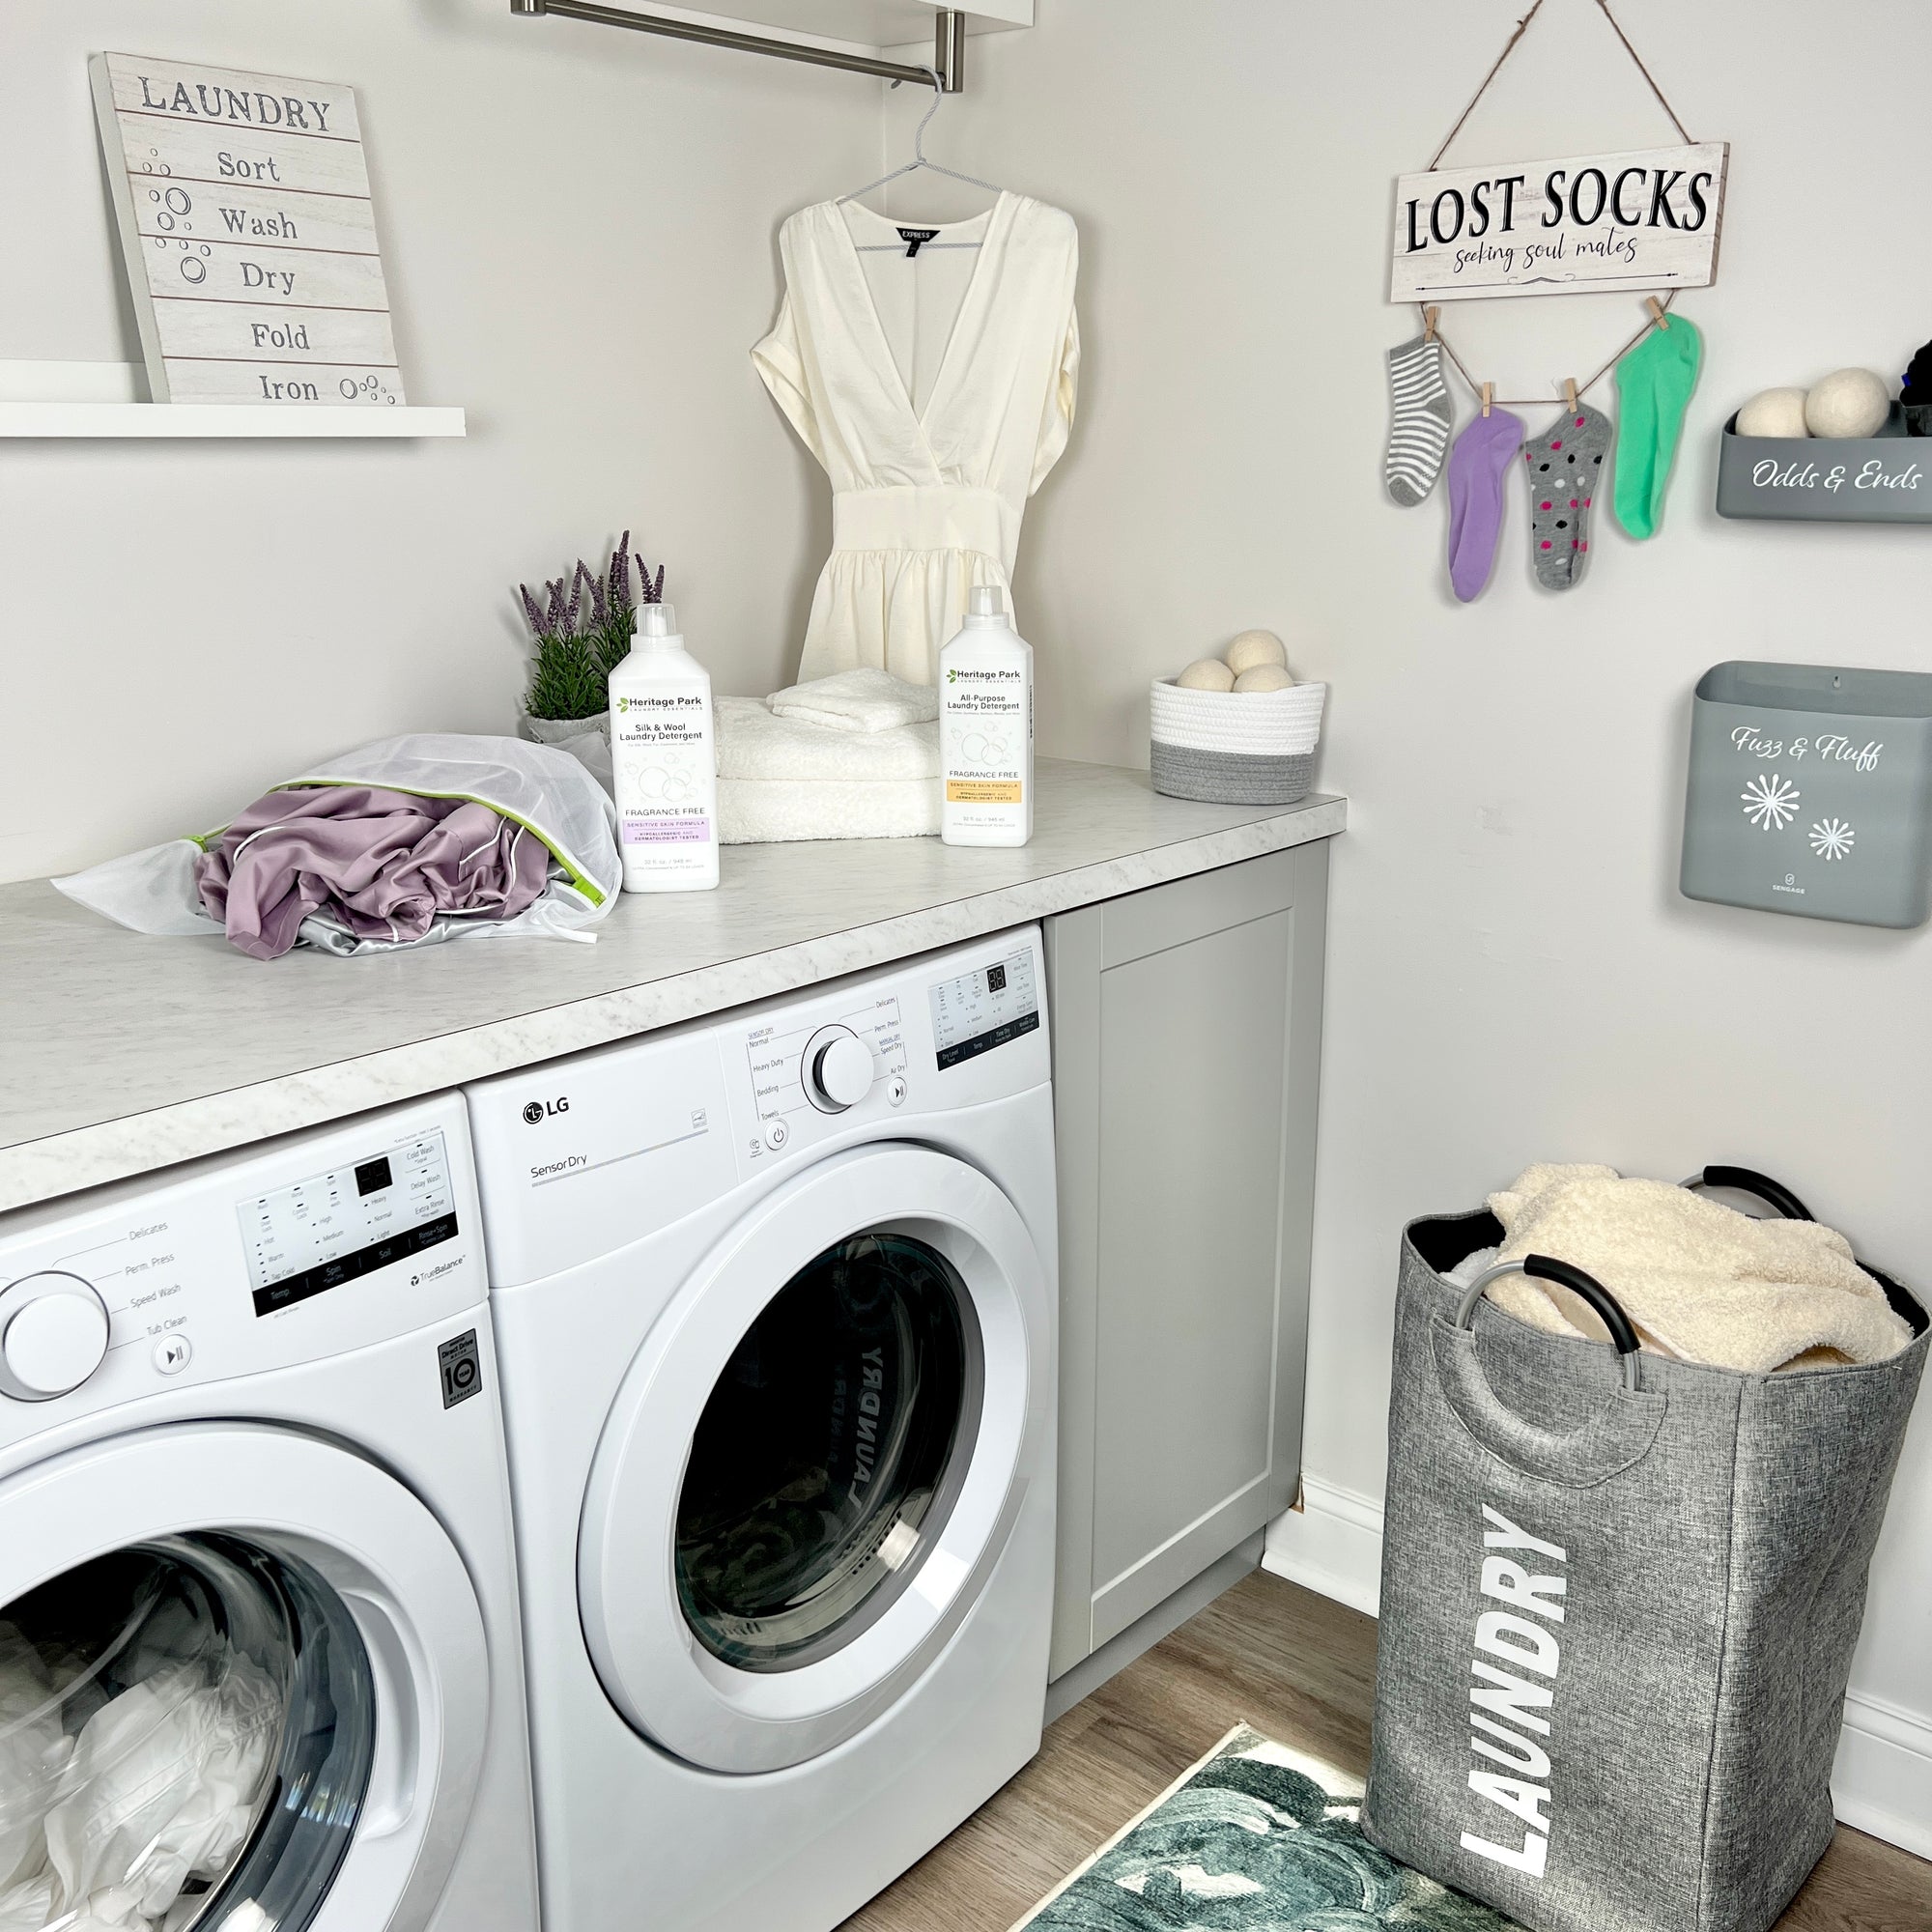 Fine Linen Care - Detergent and more